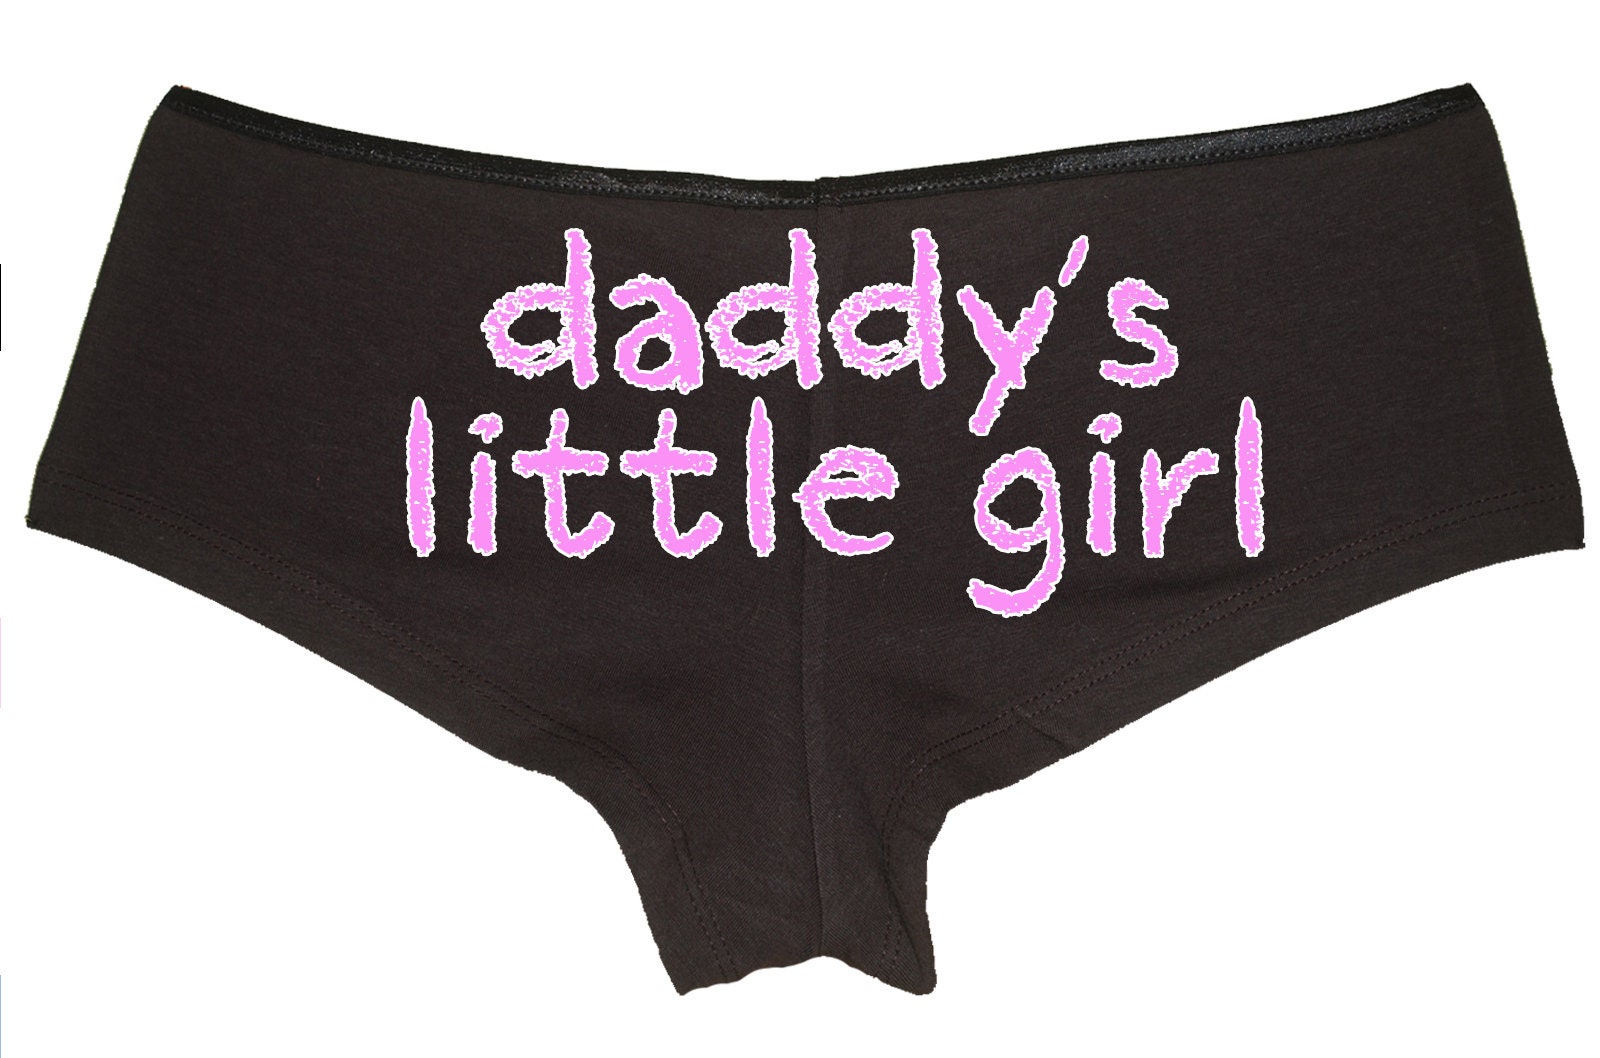 DADDYS LITTLE GIRL Ddlg Clothing Owned Slave Boy Short Panty Panties